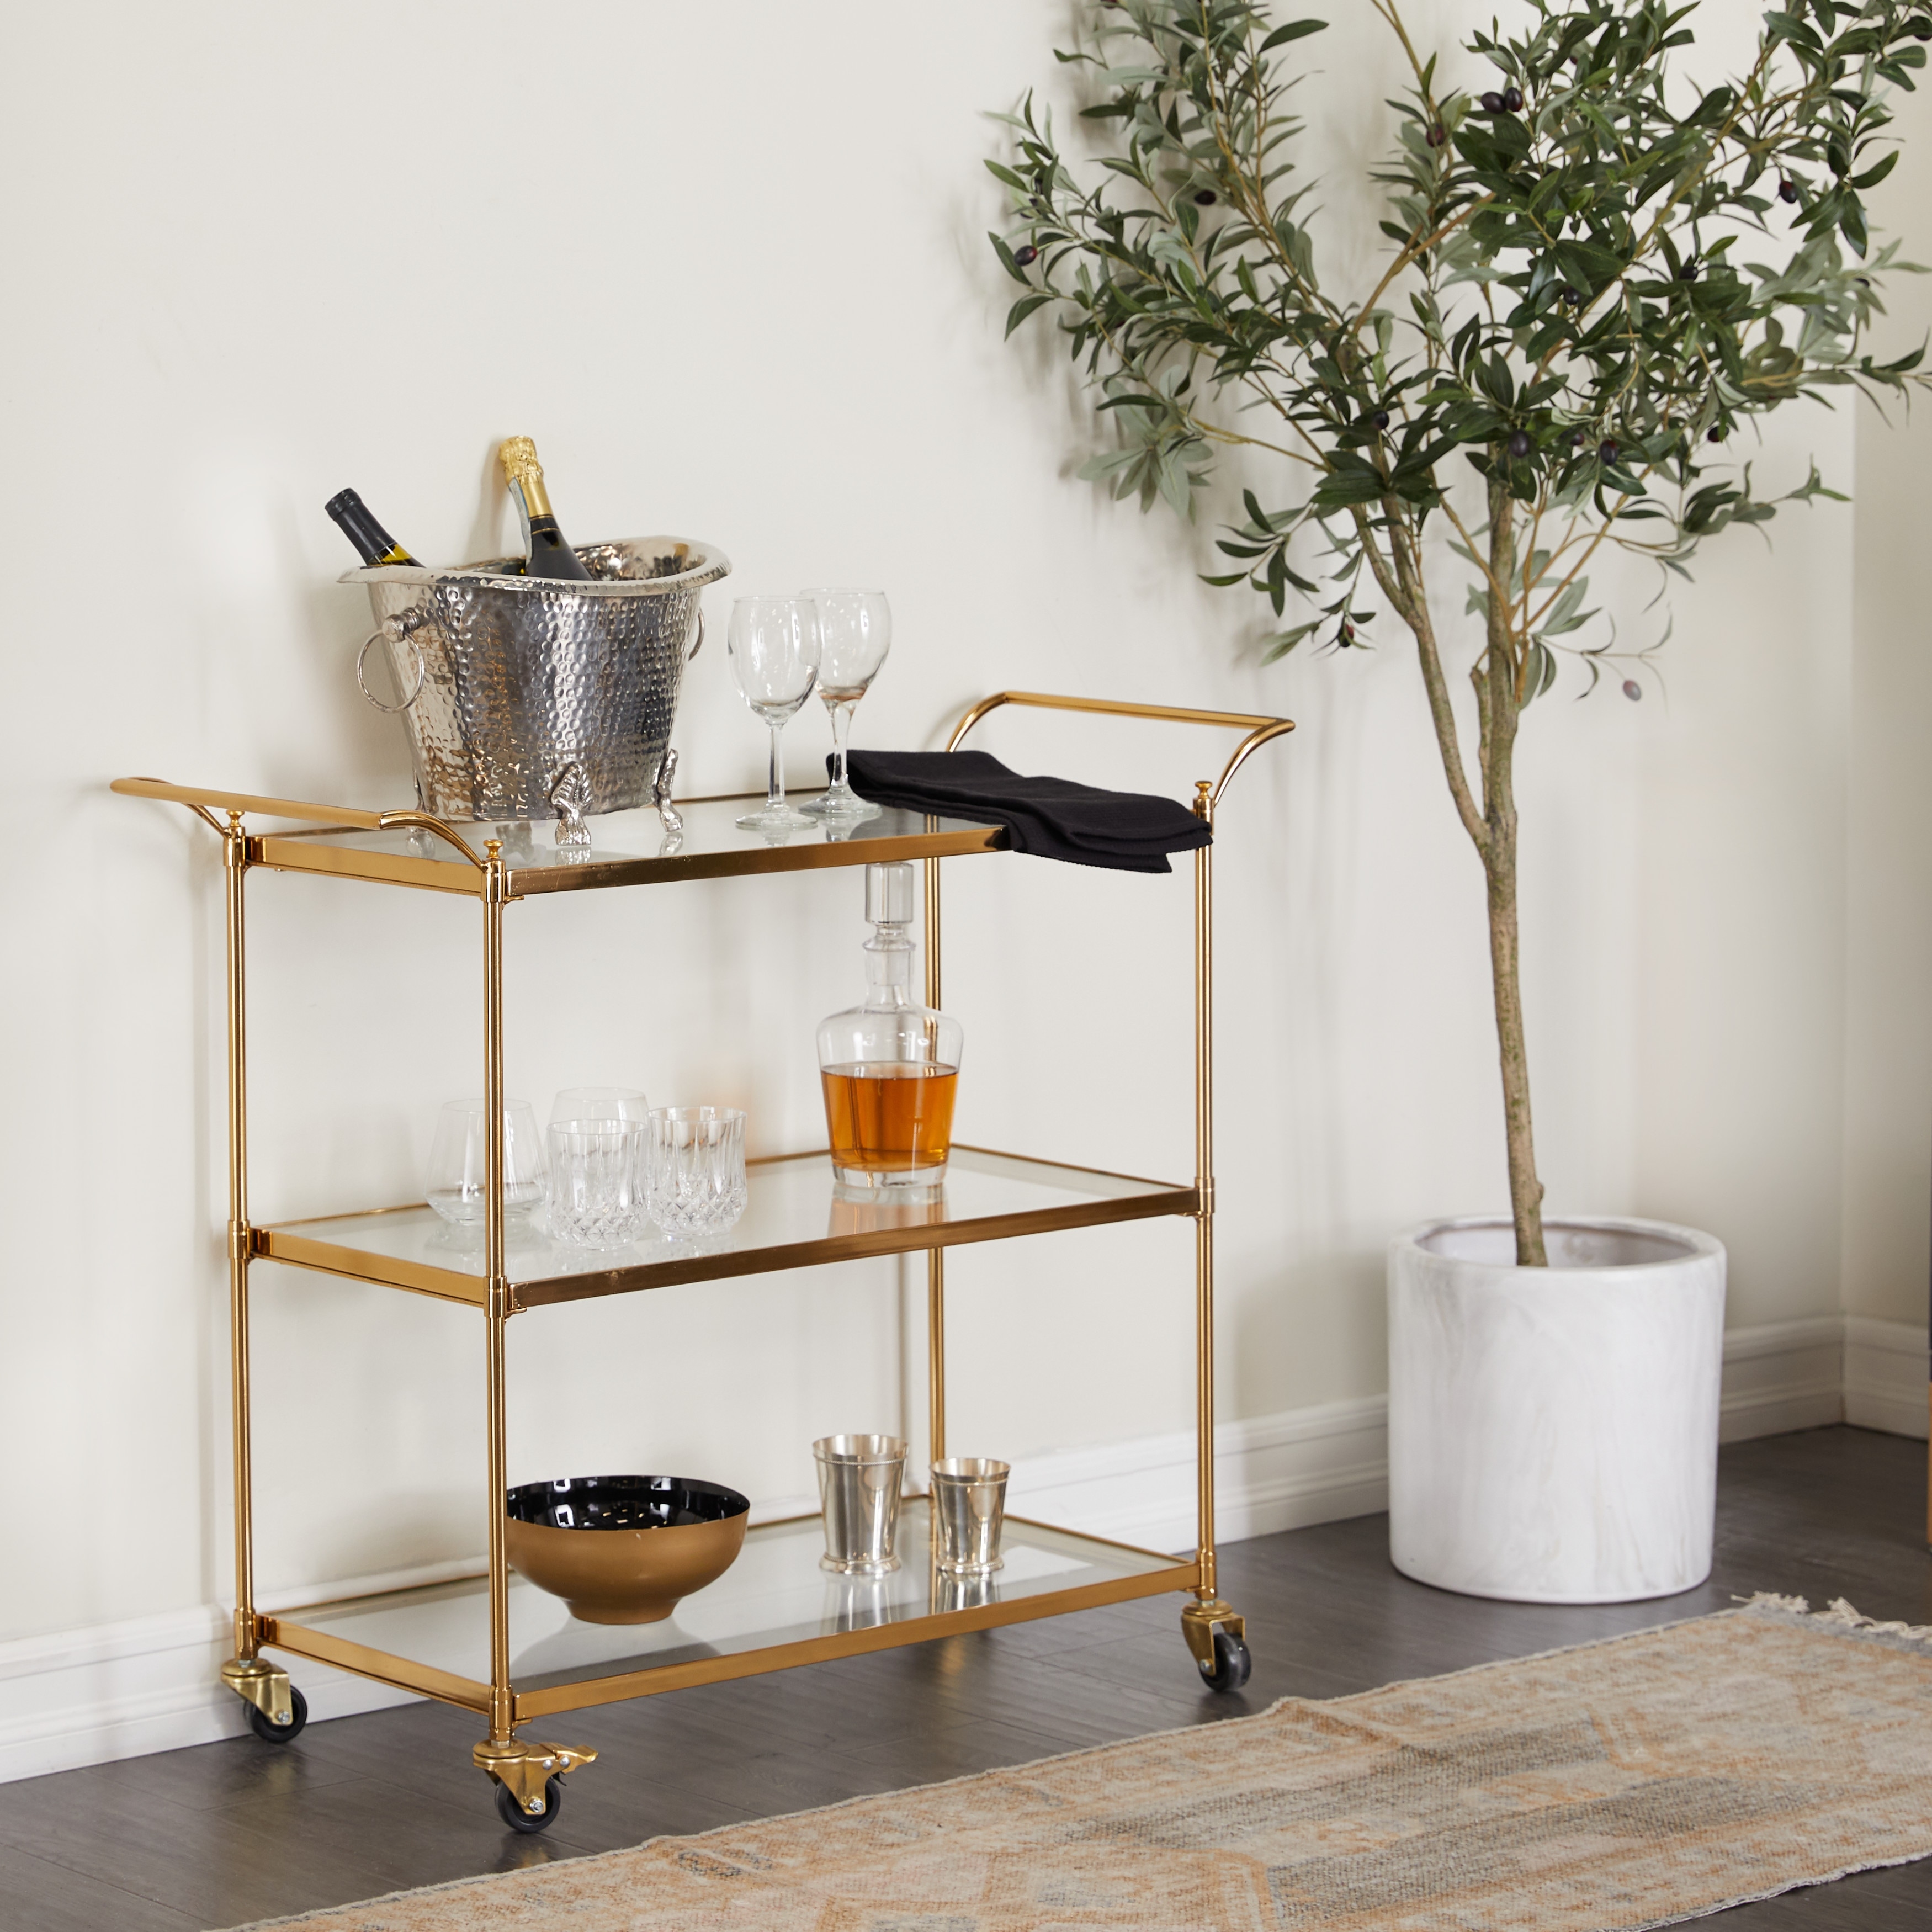 Luxurious Anitque Brass Bar Cart w/ Tempered Glass Shelf and Stylish Railings 